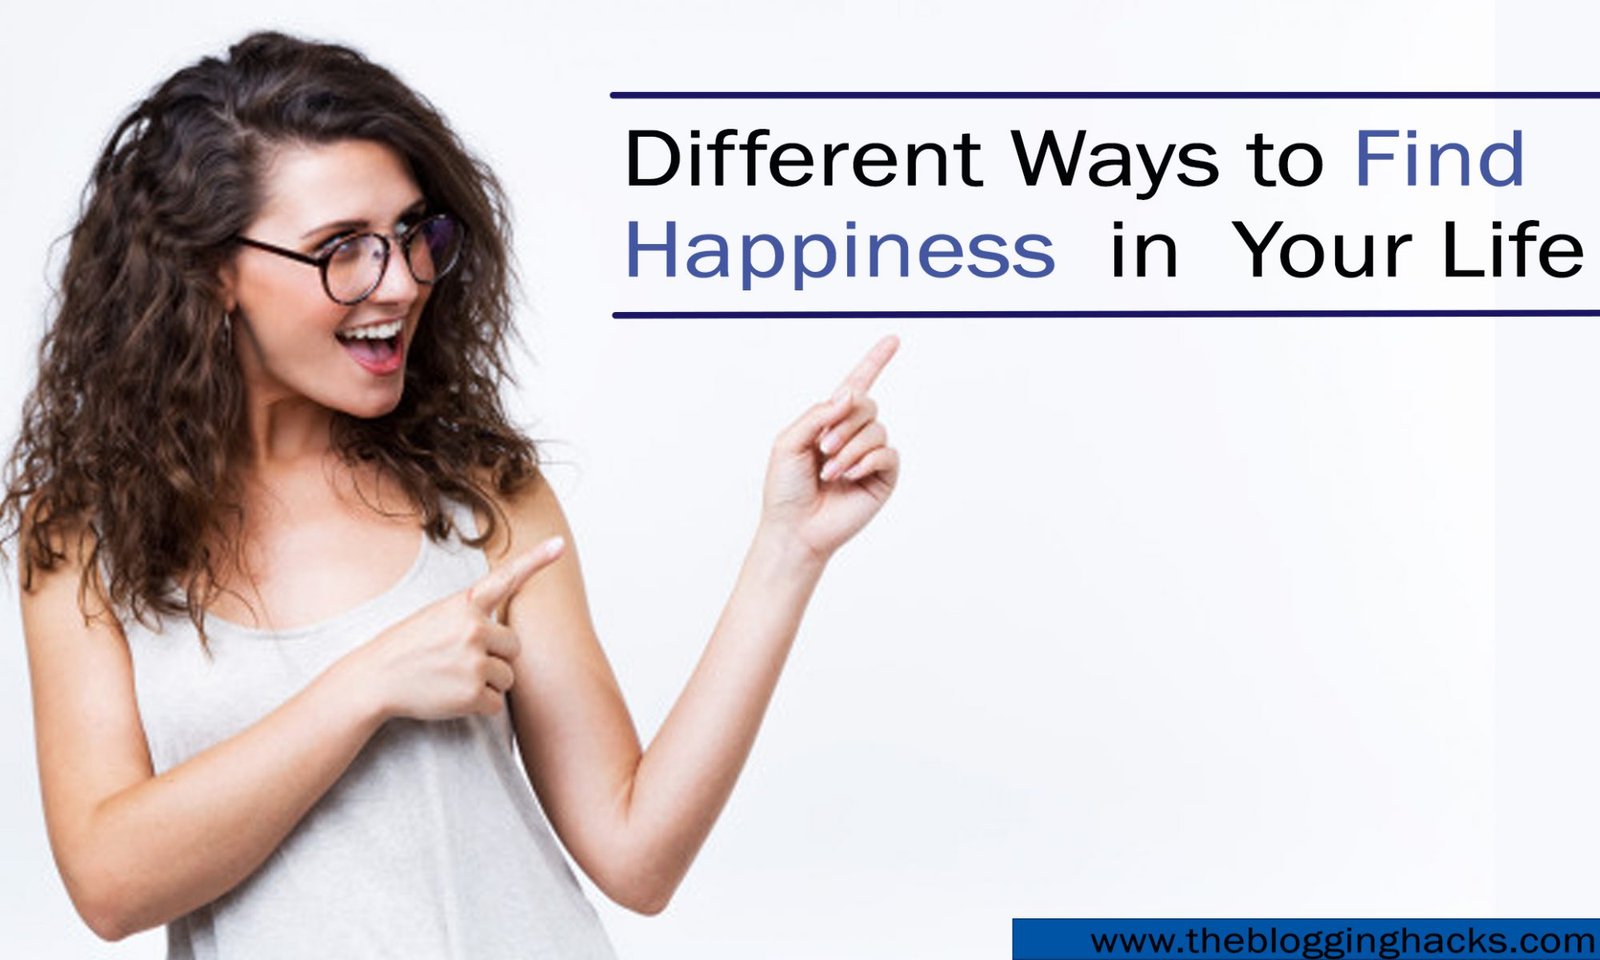 Differeny Ways to Find Happiness in Your Life